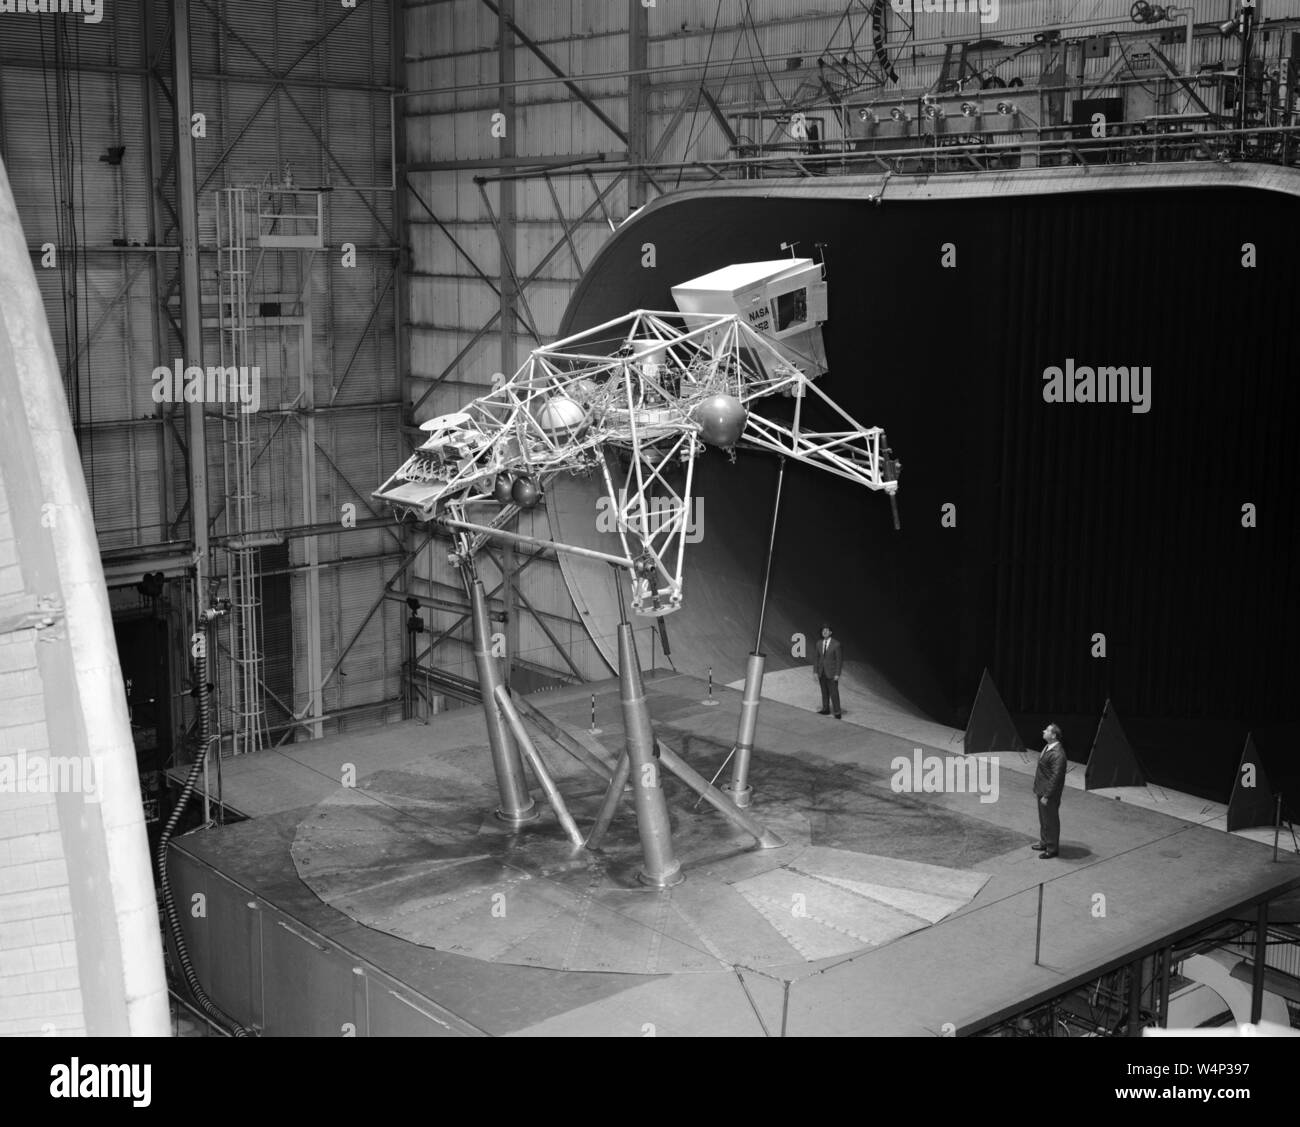 Bell Lunar Landing Training Vehicle (LLTV) in test at the Full Scale Tunnel, Langley Research Center, Hampton, Virginia, January 16, 1969. Image courtesy National Aeronautics and Space Administration (NASA). () Stock Photo